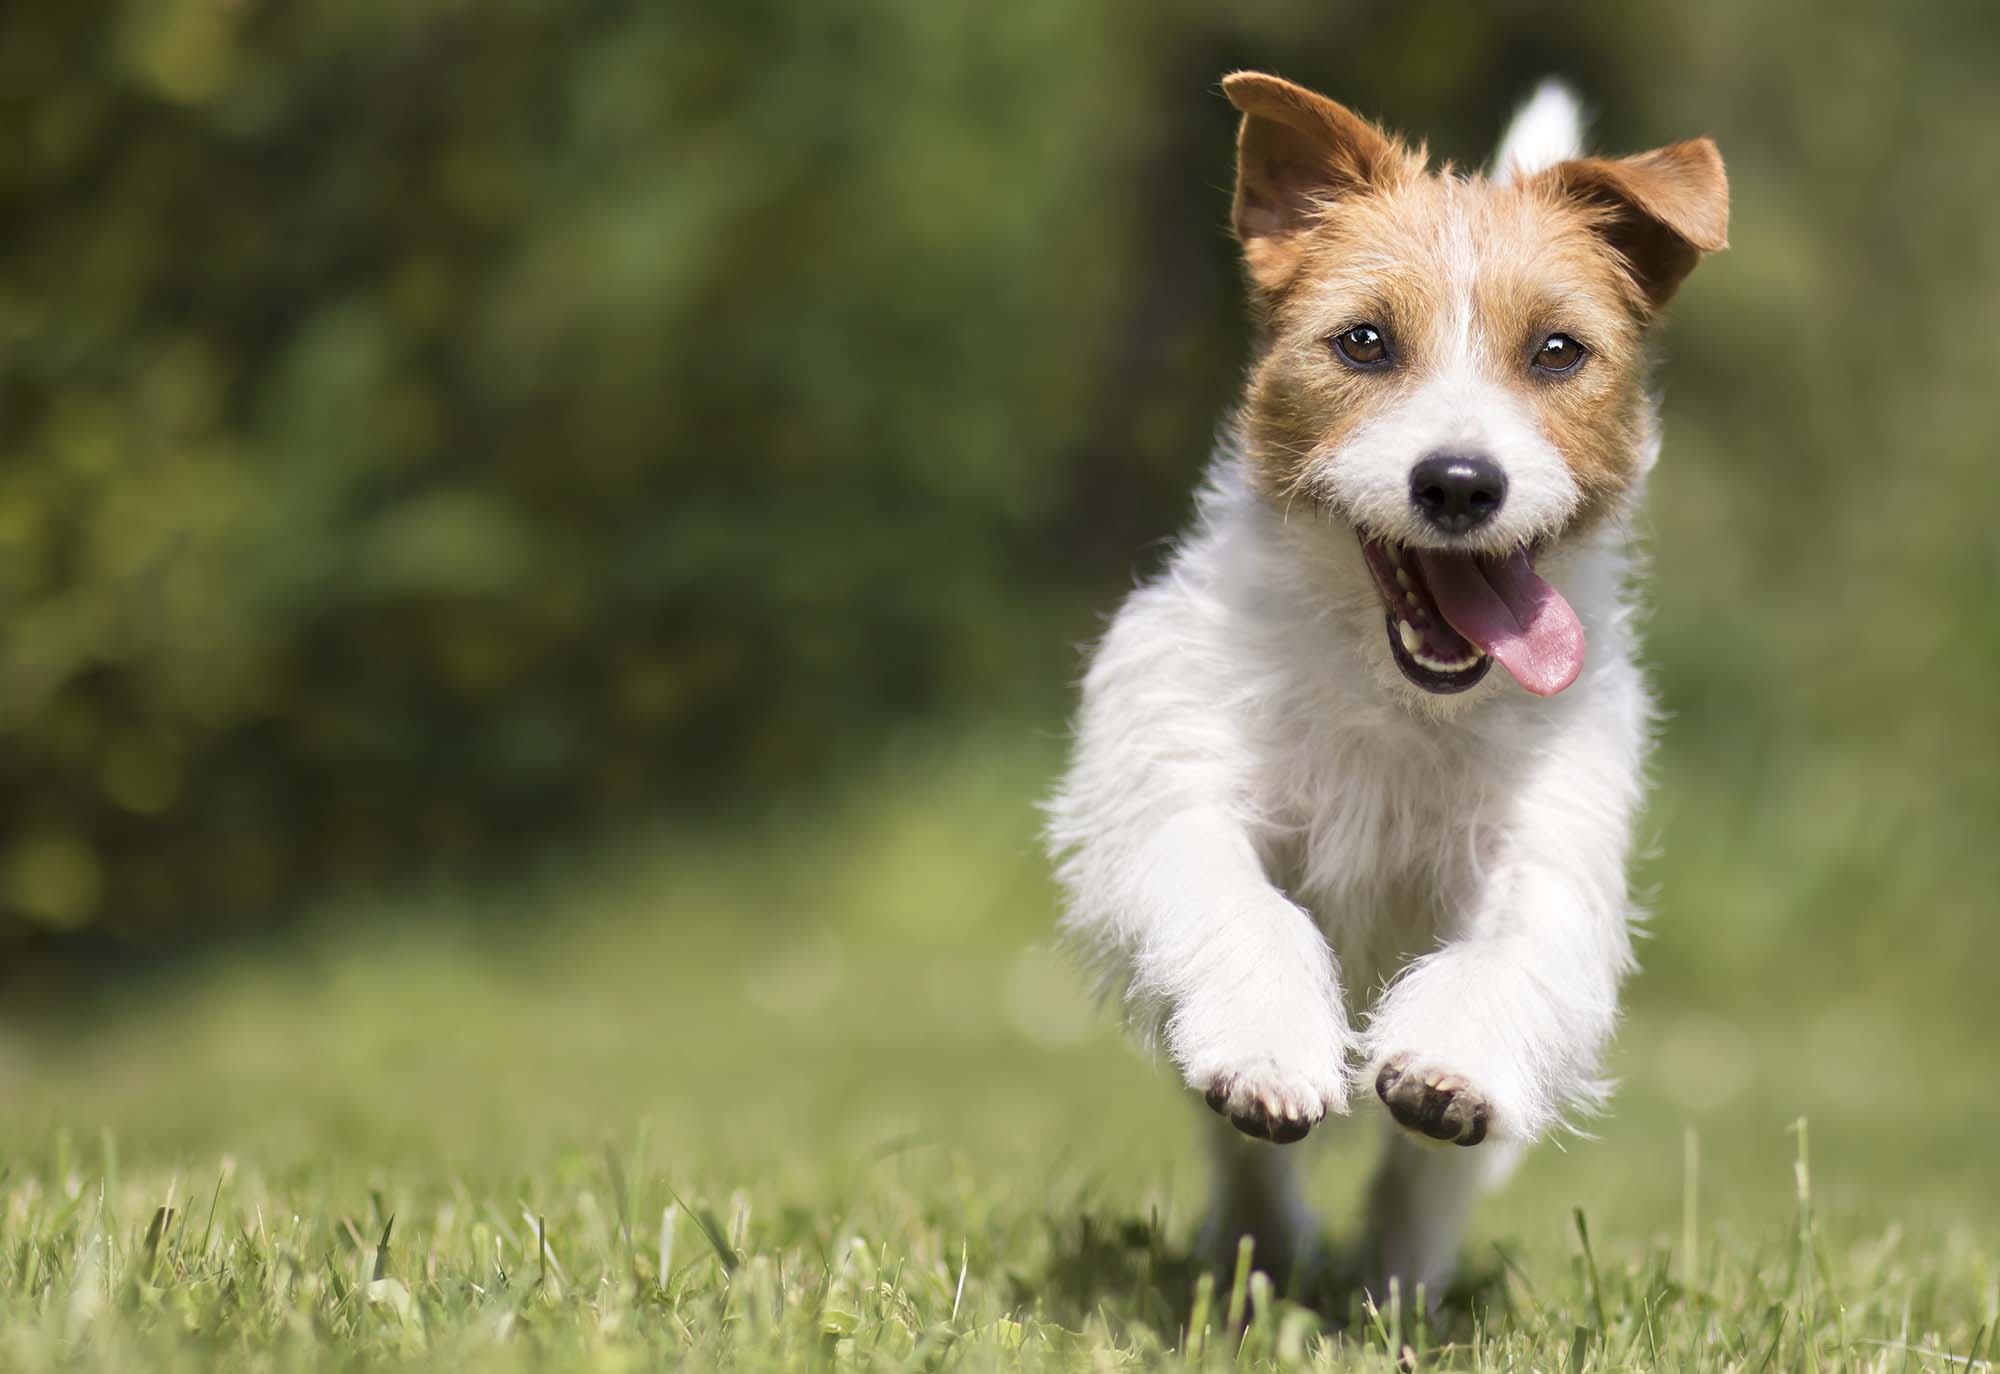 Funny playful happy crazy jack russell terrier smiling cute pet dog puppy running and jumping in the grass in summer.